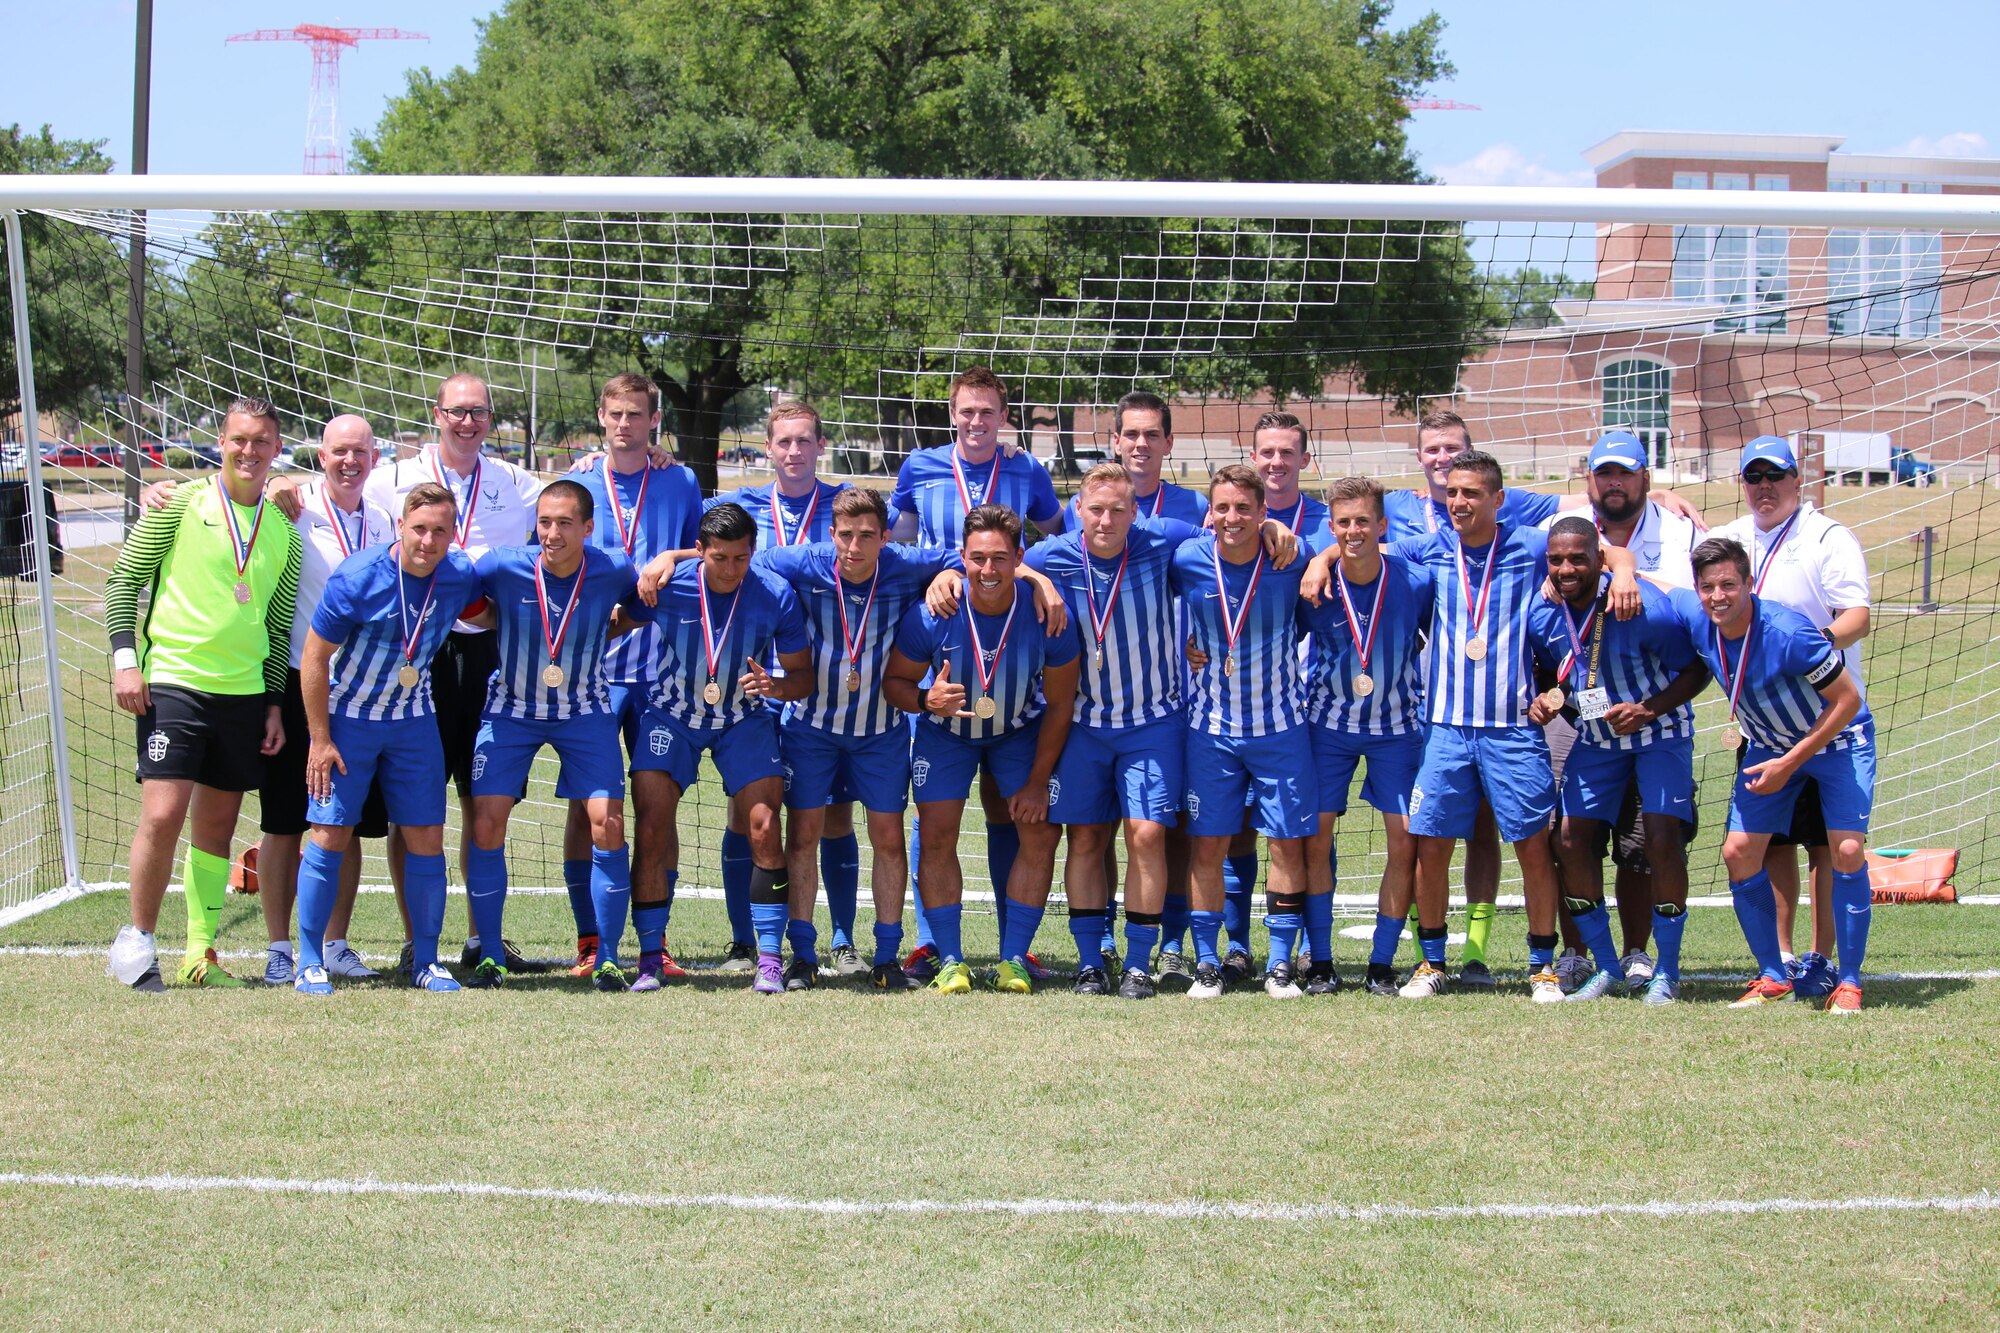 Members of the Air Force soccer team with their gold medals after winning the 2016 Armed Forces Men’s Soccer Championship at Fort Benning, Ga., May 13, 2016. Air Force prevailed in their rematch against Navy 3-2 on May 13 to capture the gold after a weeklong tournament at Fort Benning. (Courtesy photo/Steven Dinote)